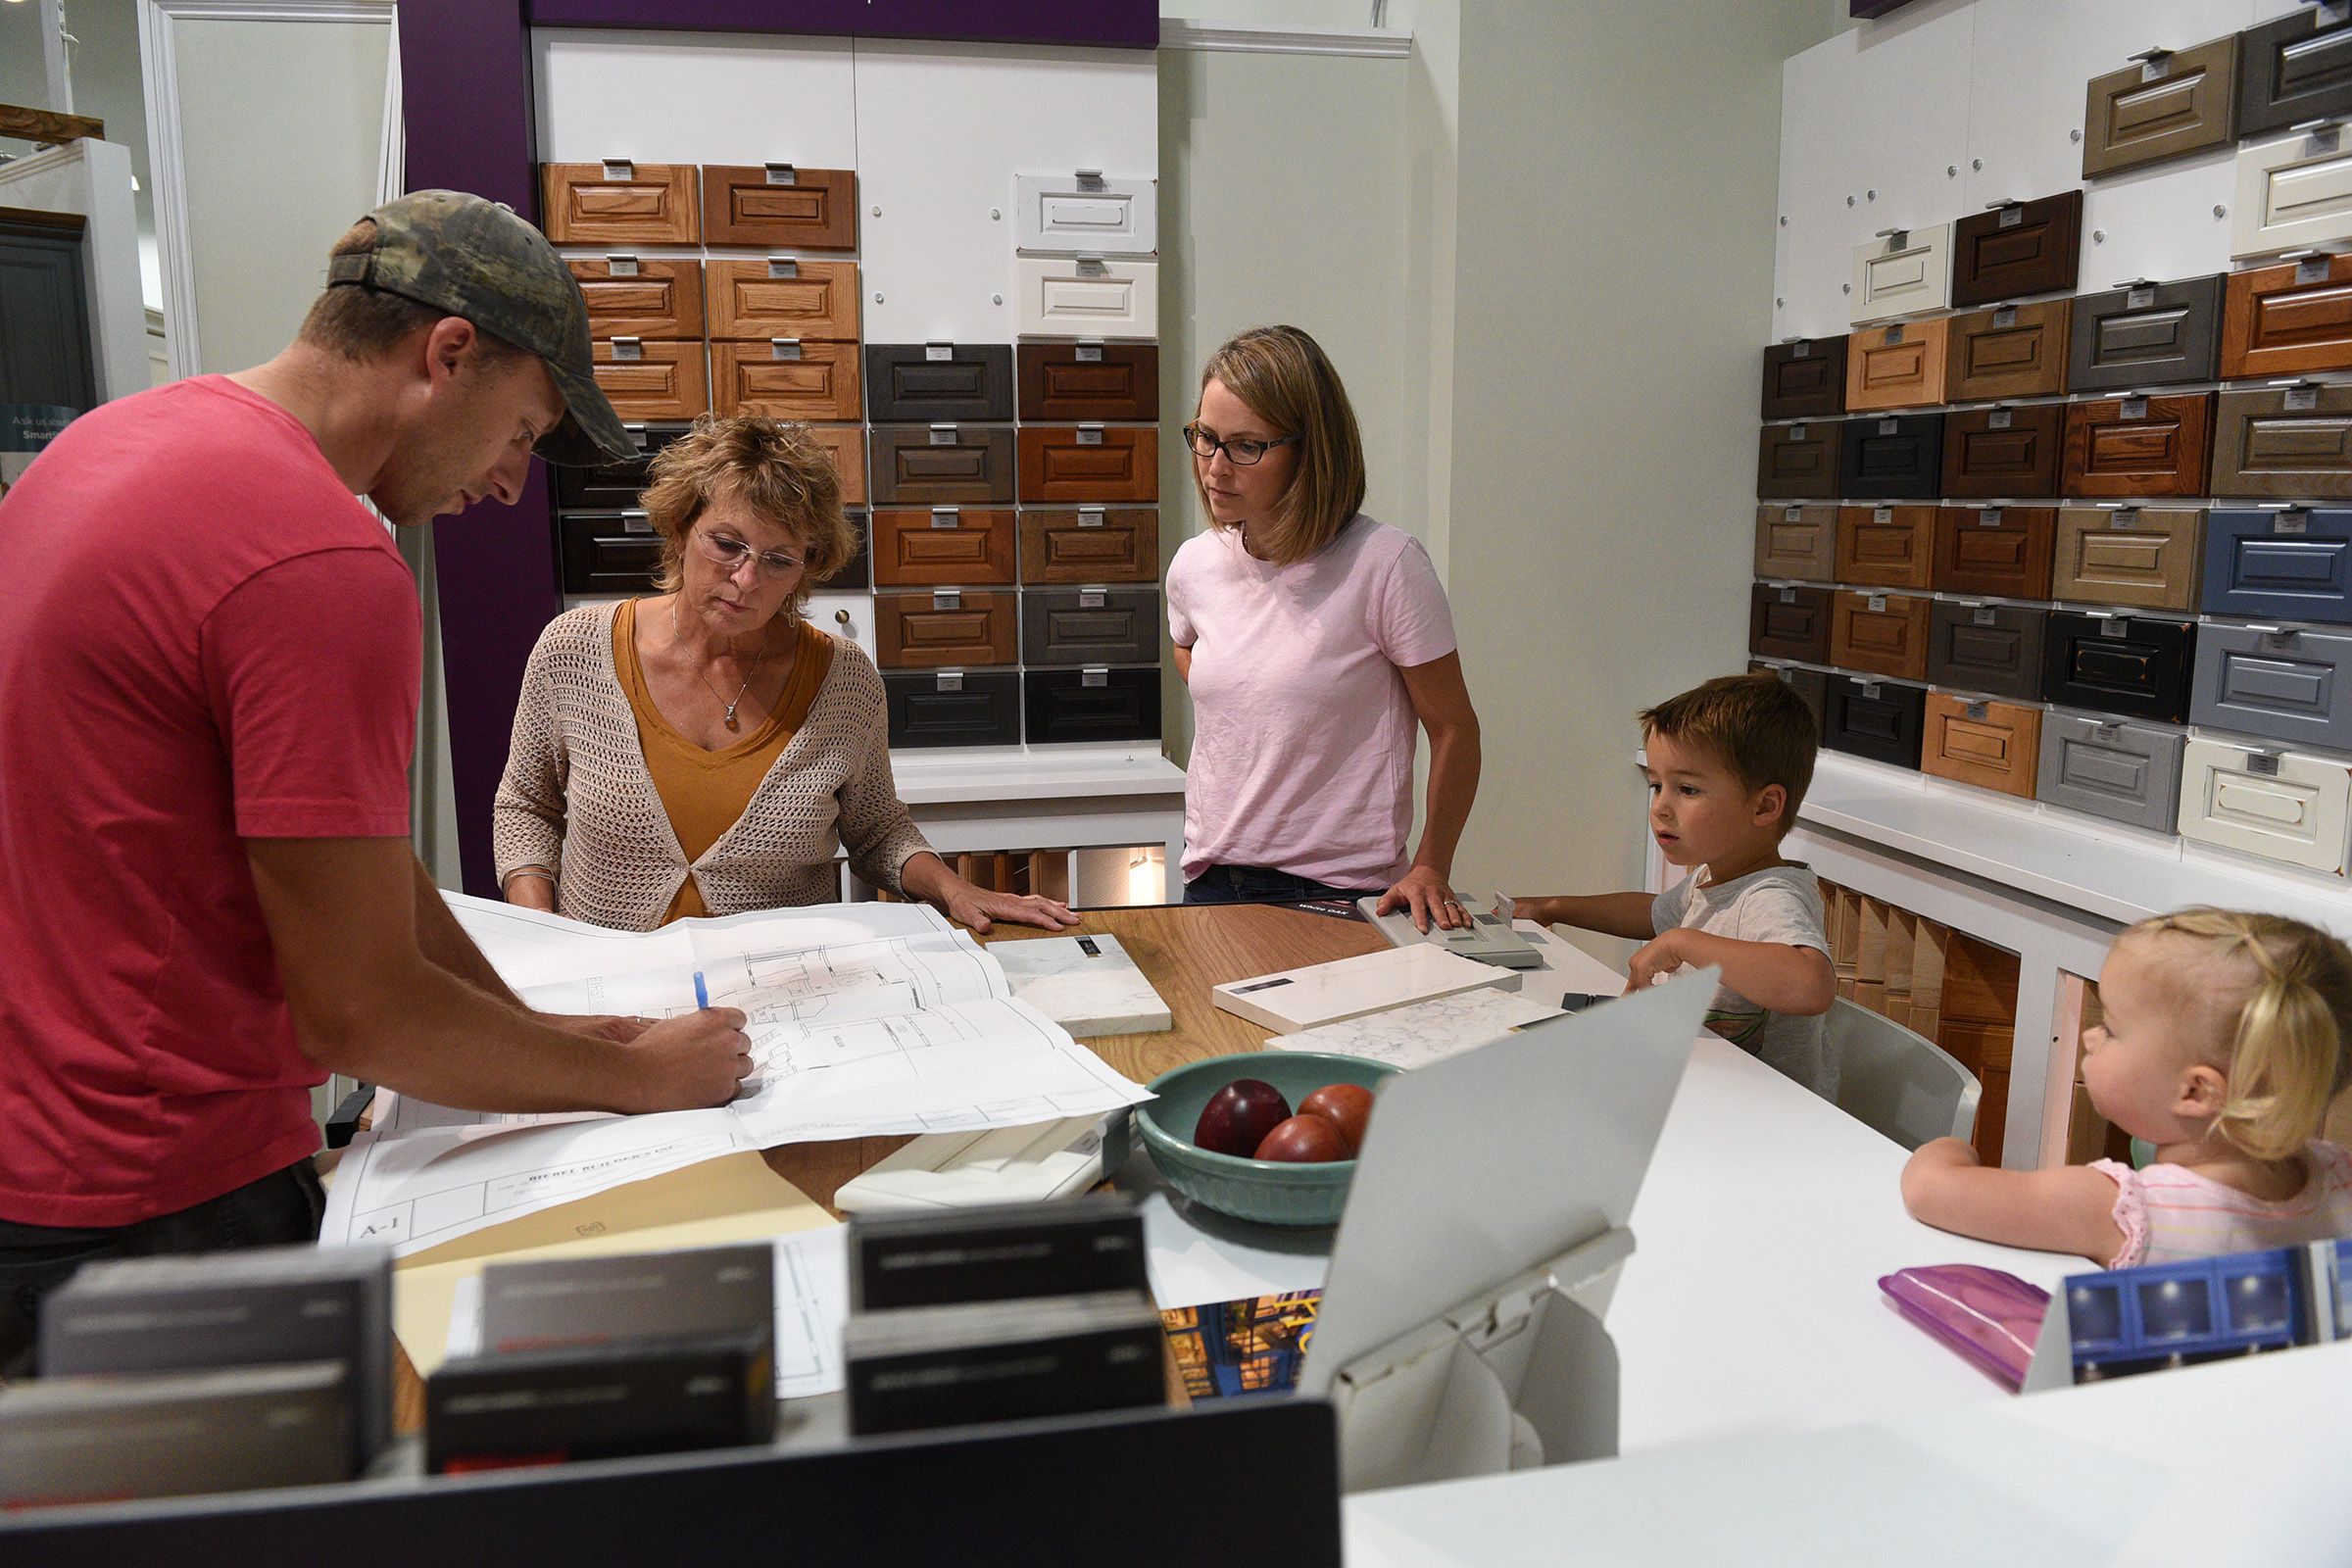 Stephanie and Tim Biebel, along with their children Oliver, 4, and Eden, 2, of Windsor, Vt., look over plans for their kitchen with kitchen designer Sheila Varnese at LaValley Building Supply in West Lebanon, N.H., on Wednesday, June 29, 2022. ( Valley News - Jennifer Hauck) Copyright Valley News. May not be reprinted or used online without permission. Send requests to permission@vnews.com.